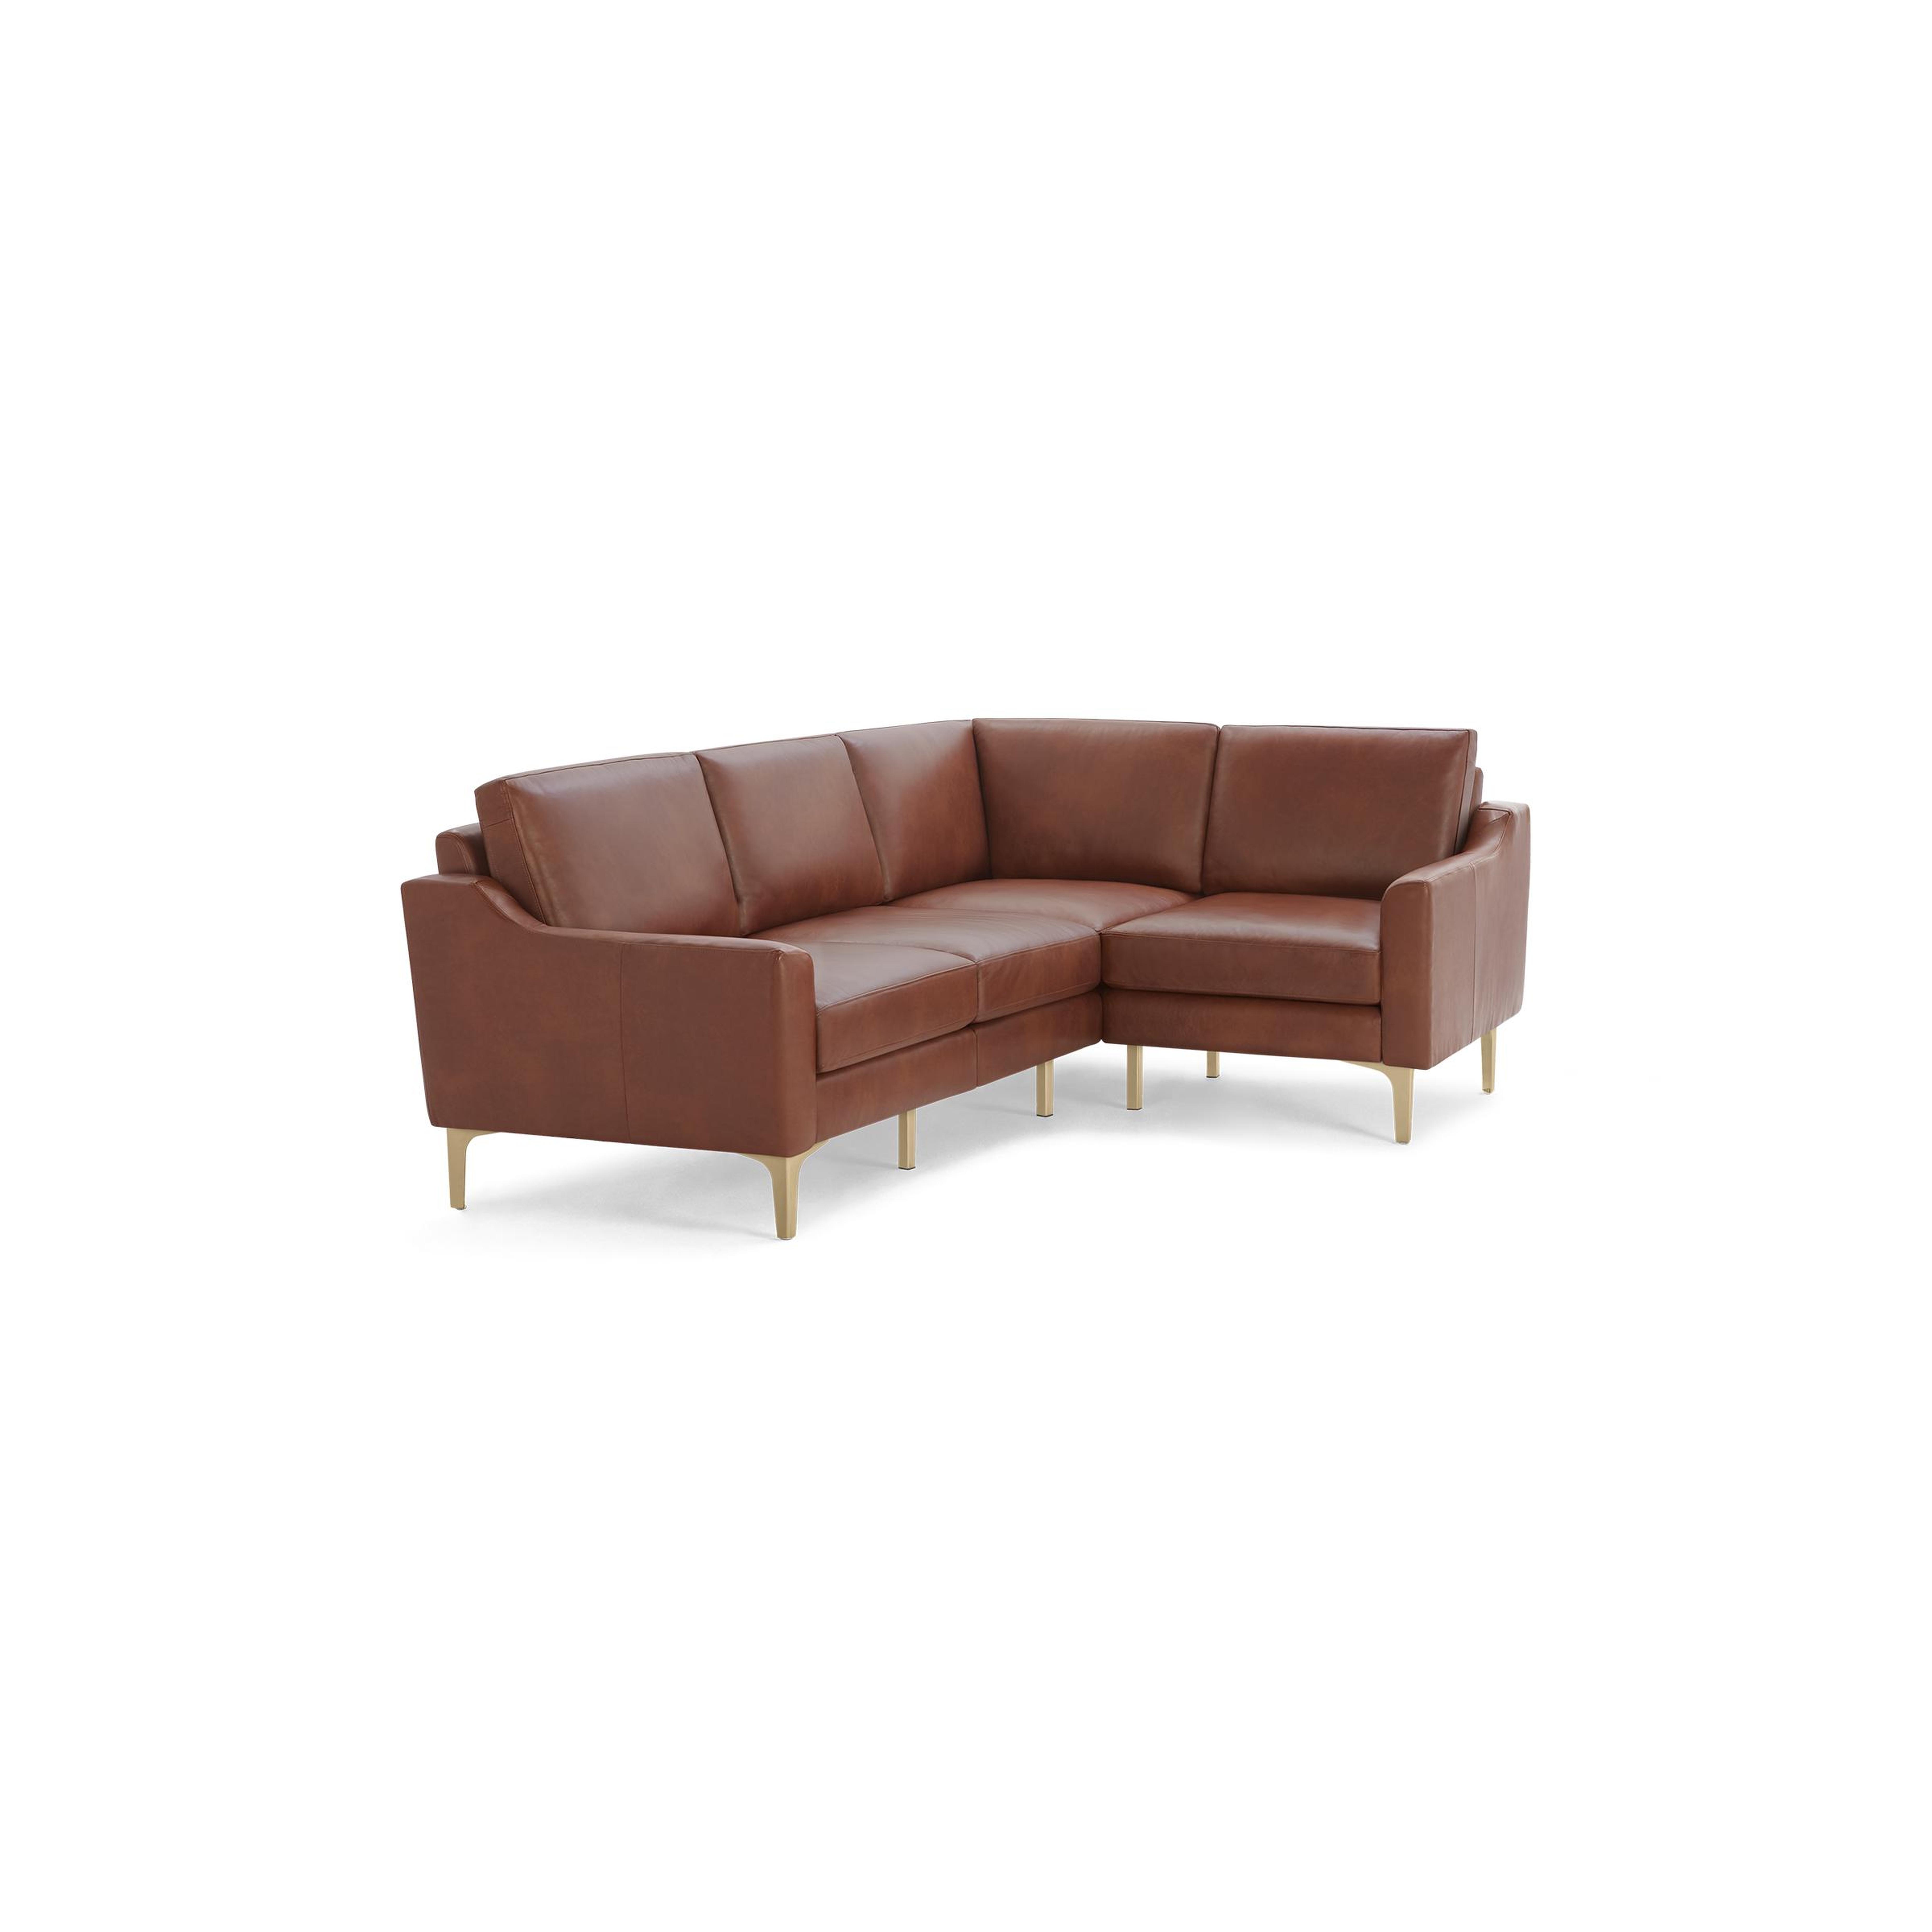 Nomad Leather 4-Seat Corner Sectional in Chestnut - Burrow